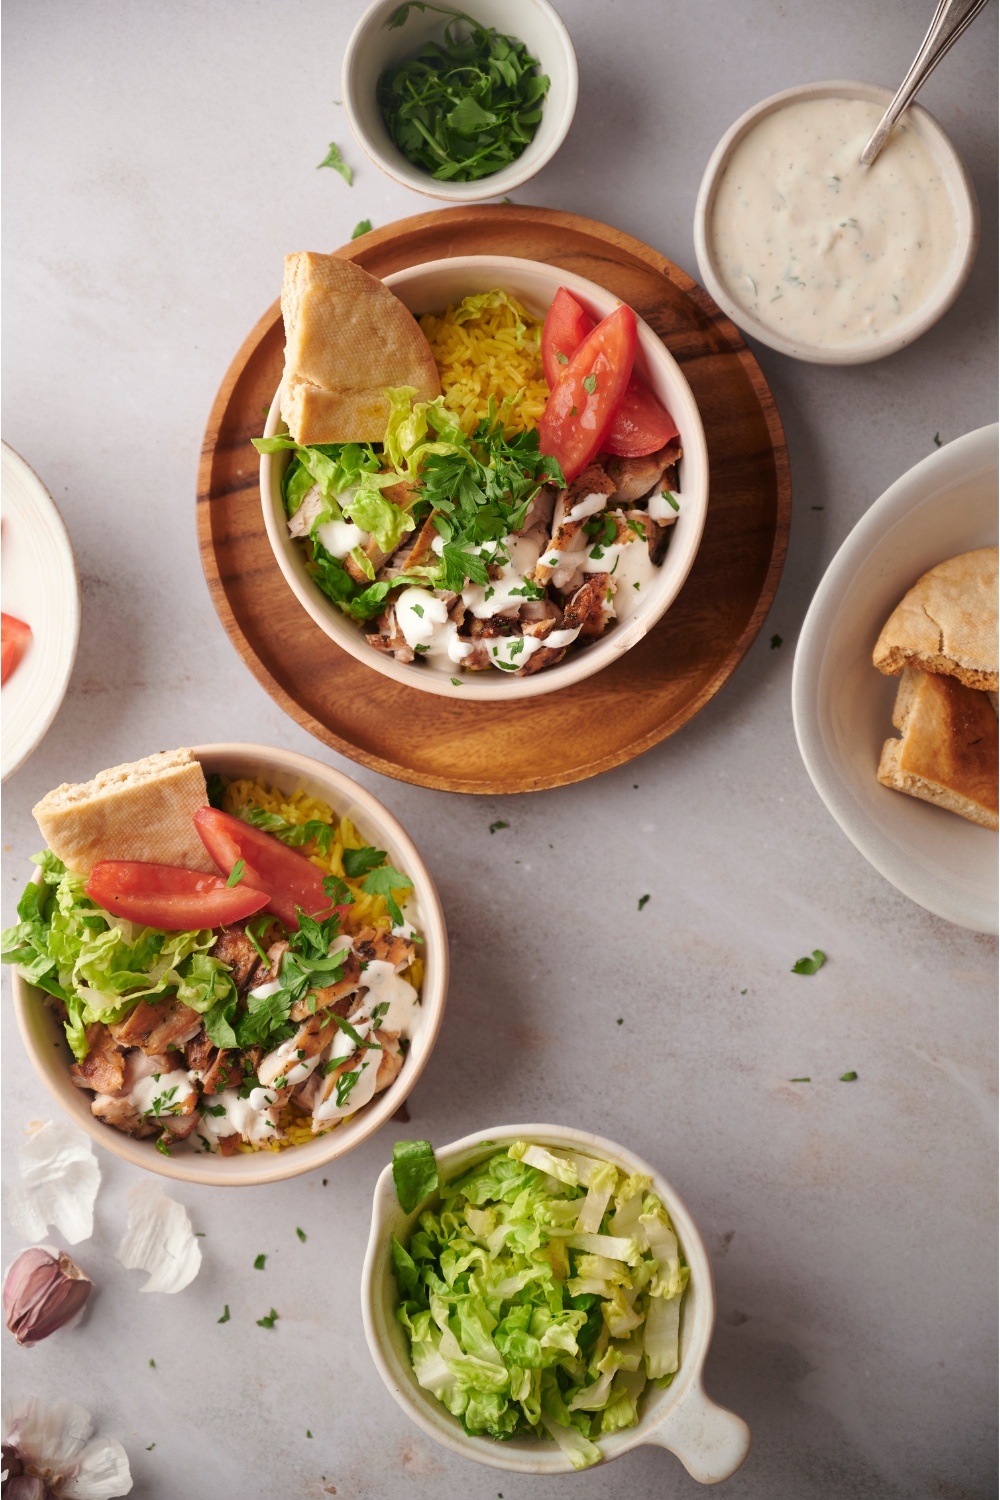 Bowls of halal chicken over rice, each with wedges of pita bread. One bowl is on a wooden plate. There is a small bowl of shredded lettuce and an assortment of other ingredients surrounding the bowls.